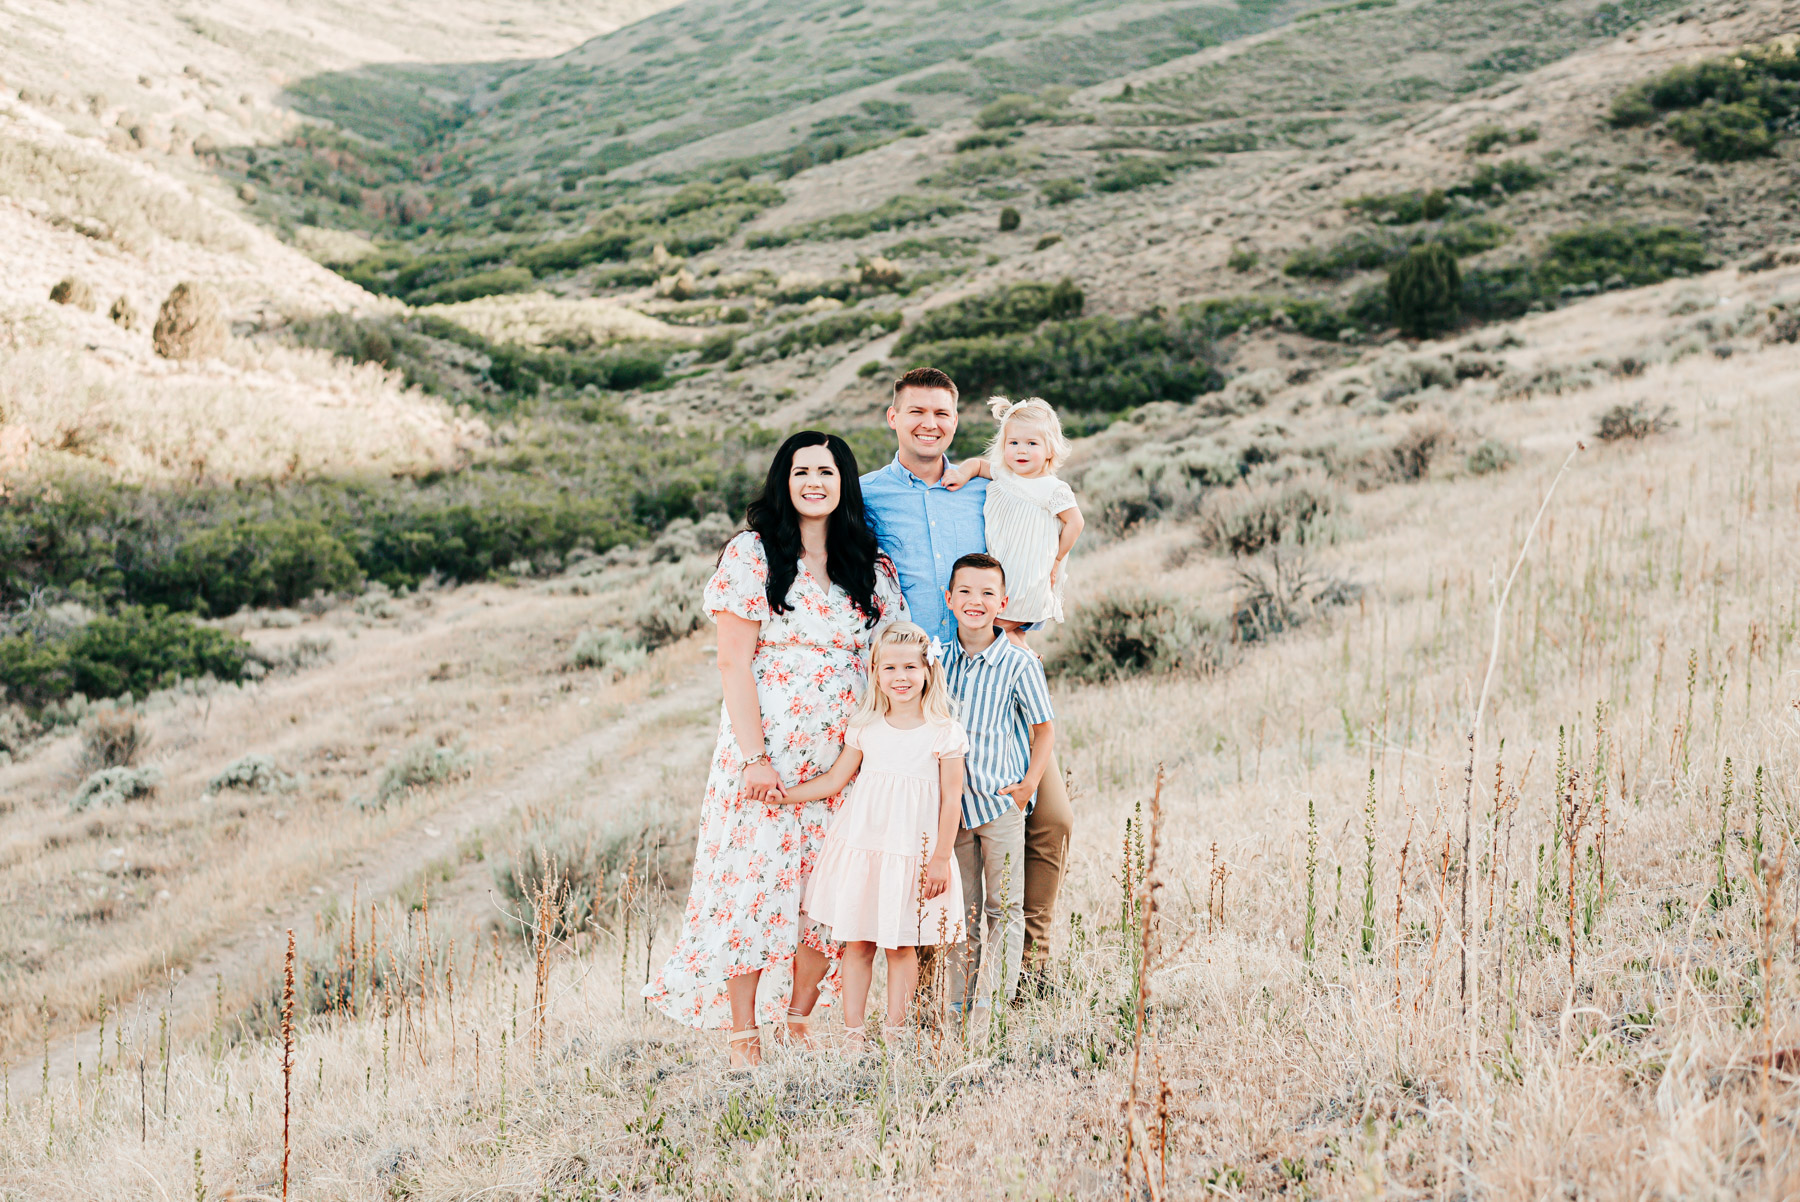 Family of 5 wearing peach and blue outfits smiles on grassy mountain side for a family photo.